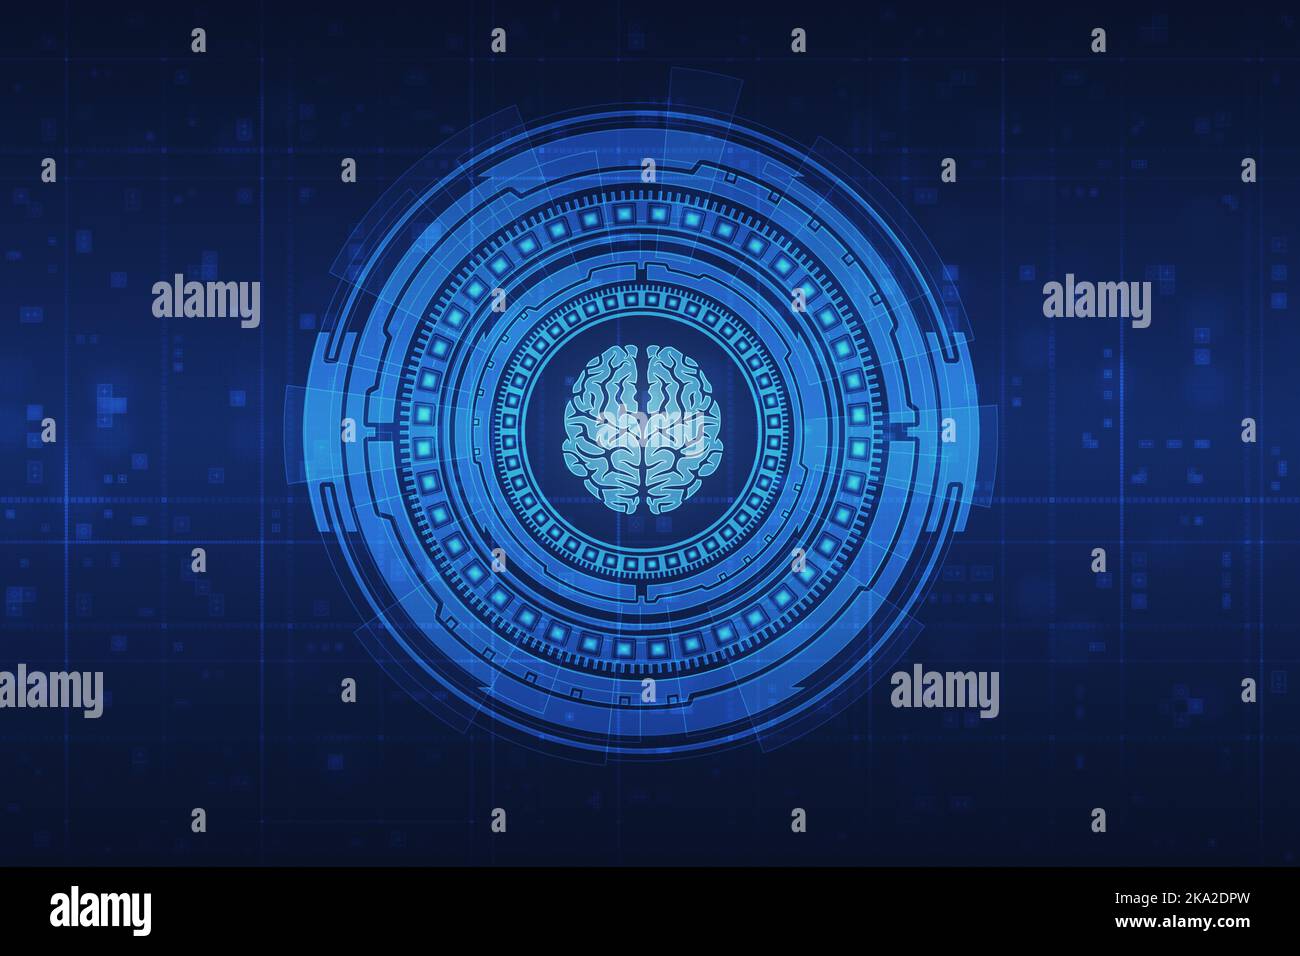 Medical hud screen with brain. Online medicine and health concept Stock Photo